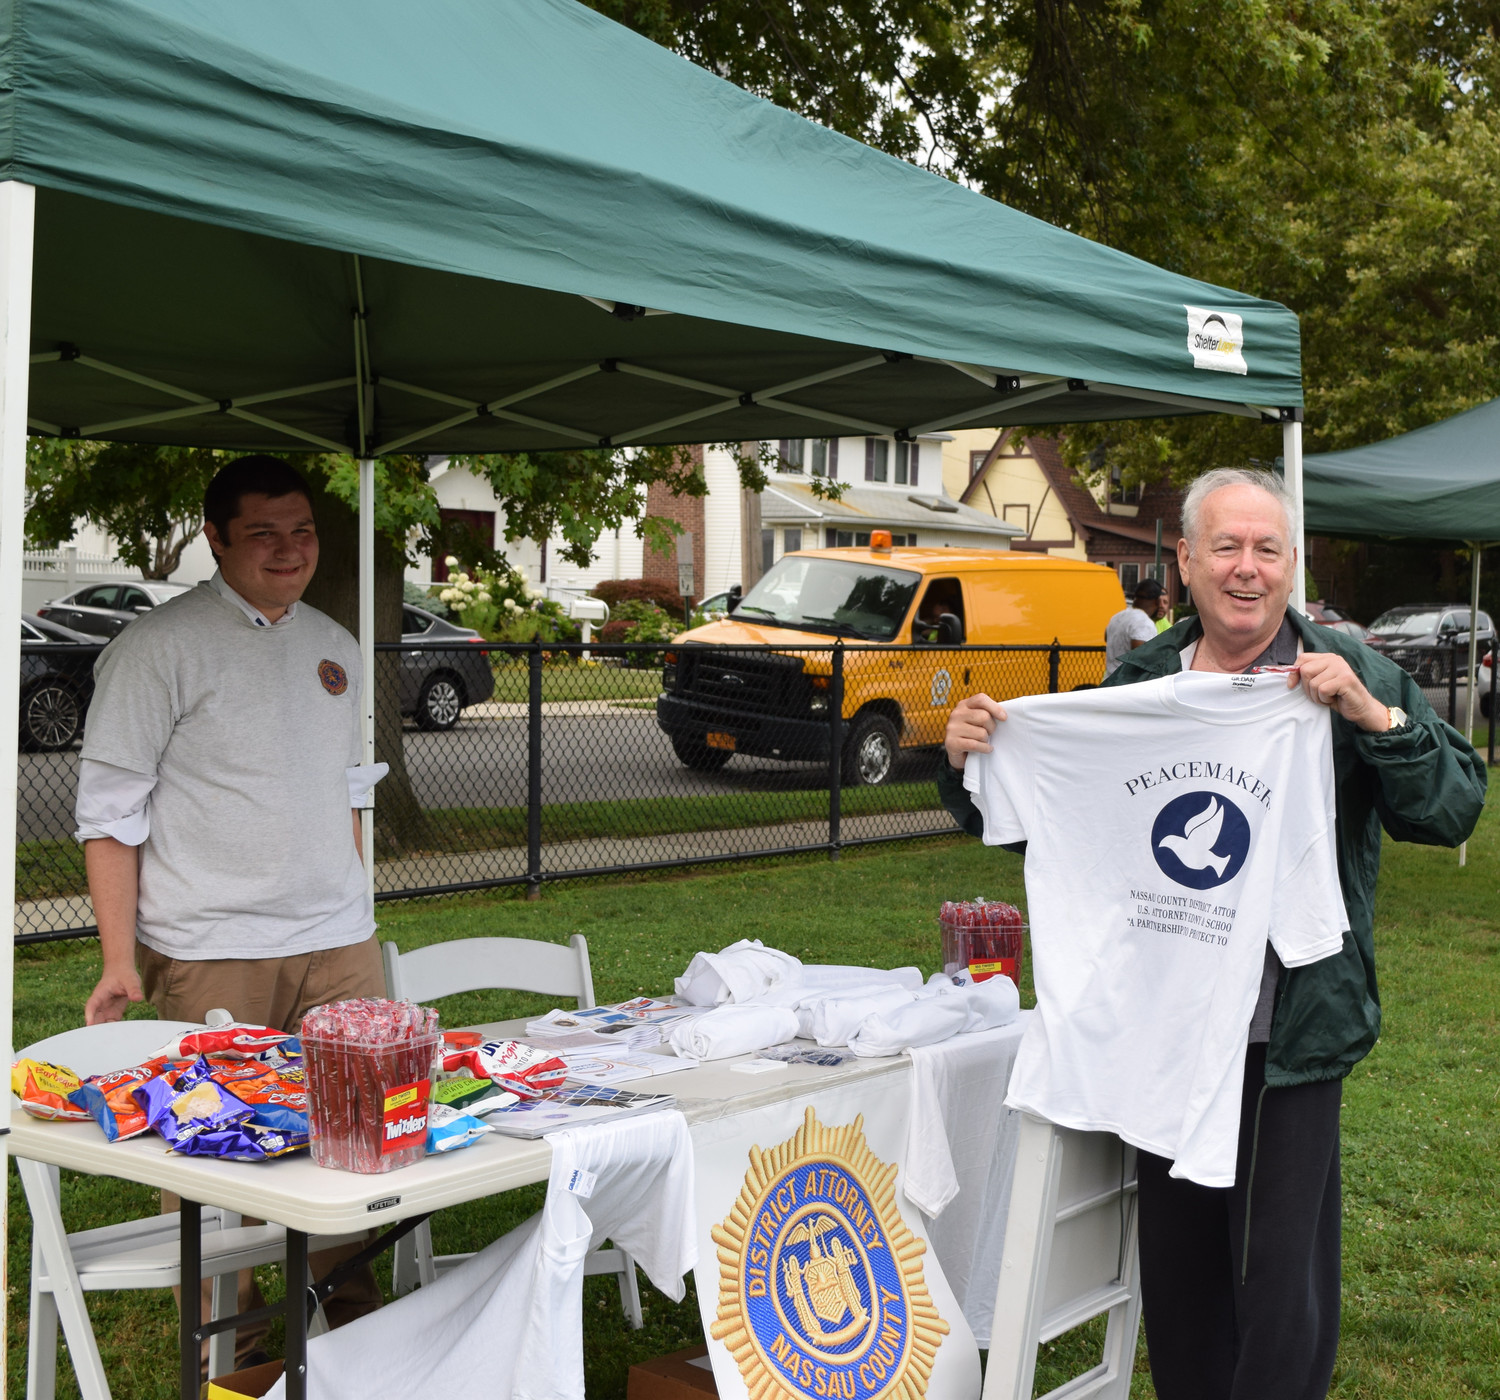 George Heino showed off the swag he picked up at National Night Out at Andrew J. Paris Cedarhurst Park. At left, fellow Woodmere resident Yitzchak Carroll, a Nassau County District Attorney office liaison.